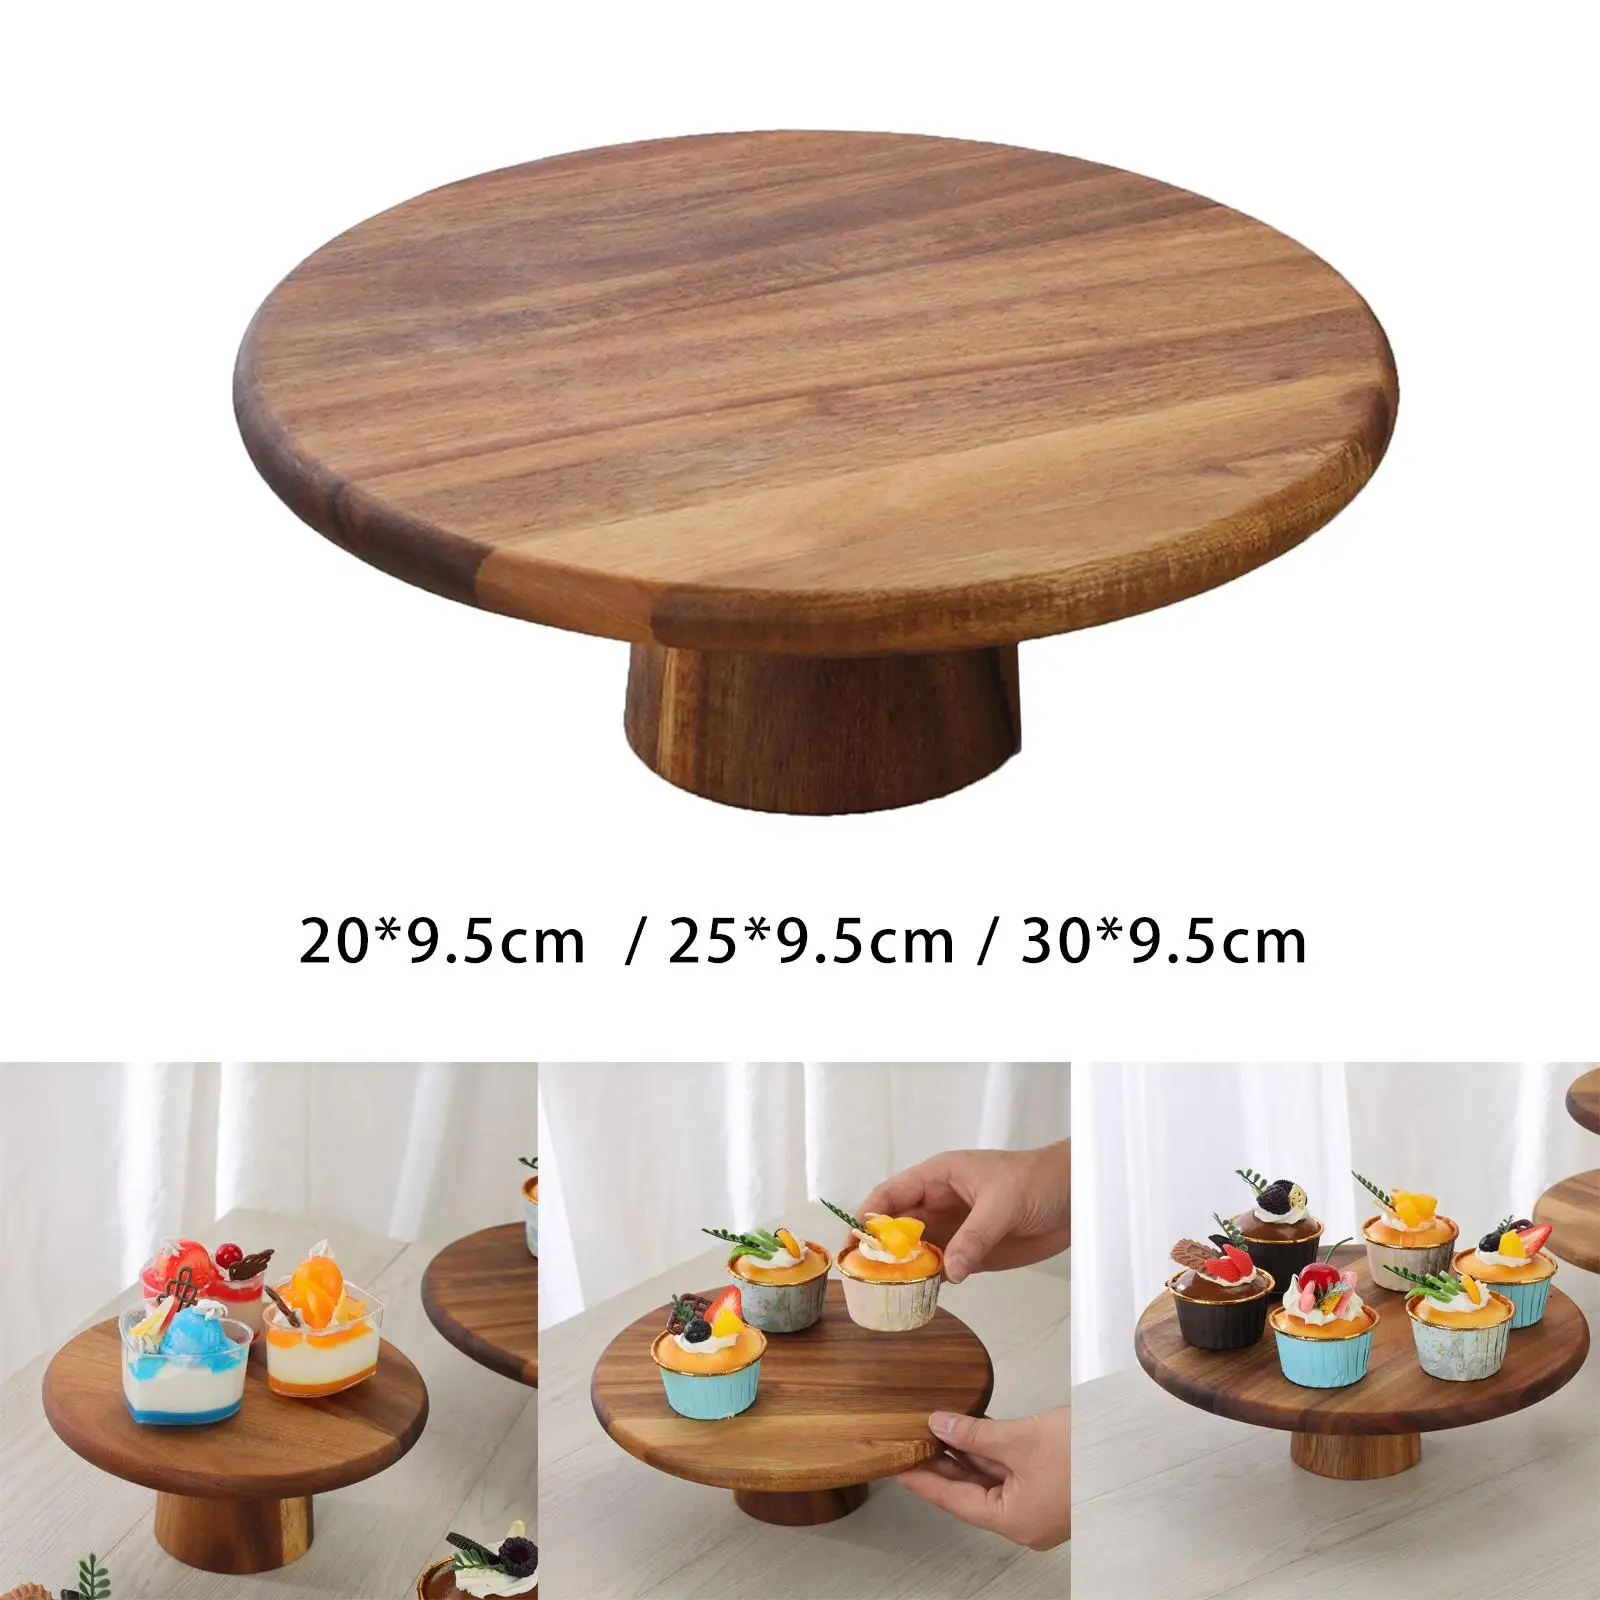 Wood Cake Stand Serving Tray Serving Platter for Muffins Pastries Appetizers